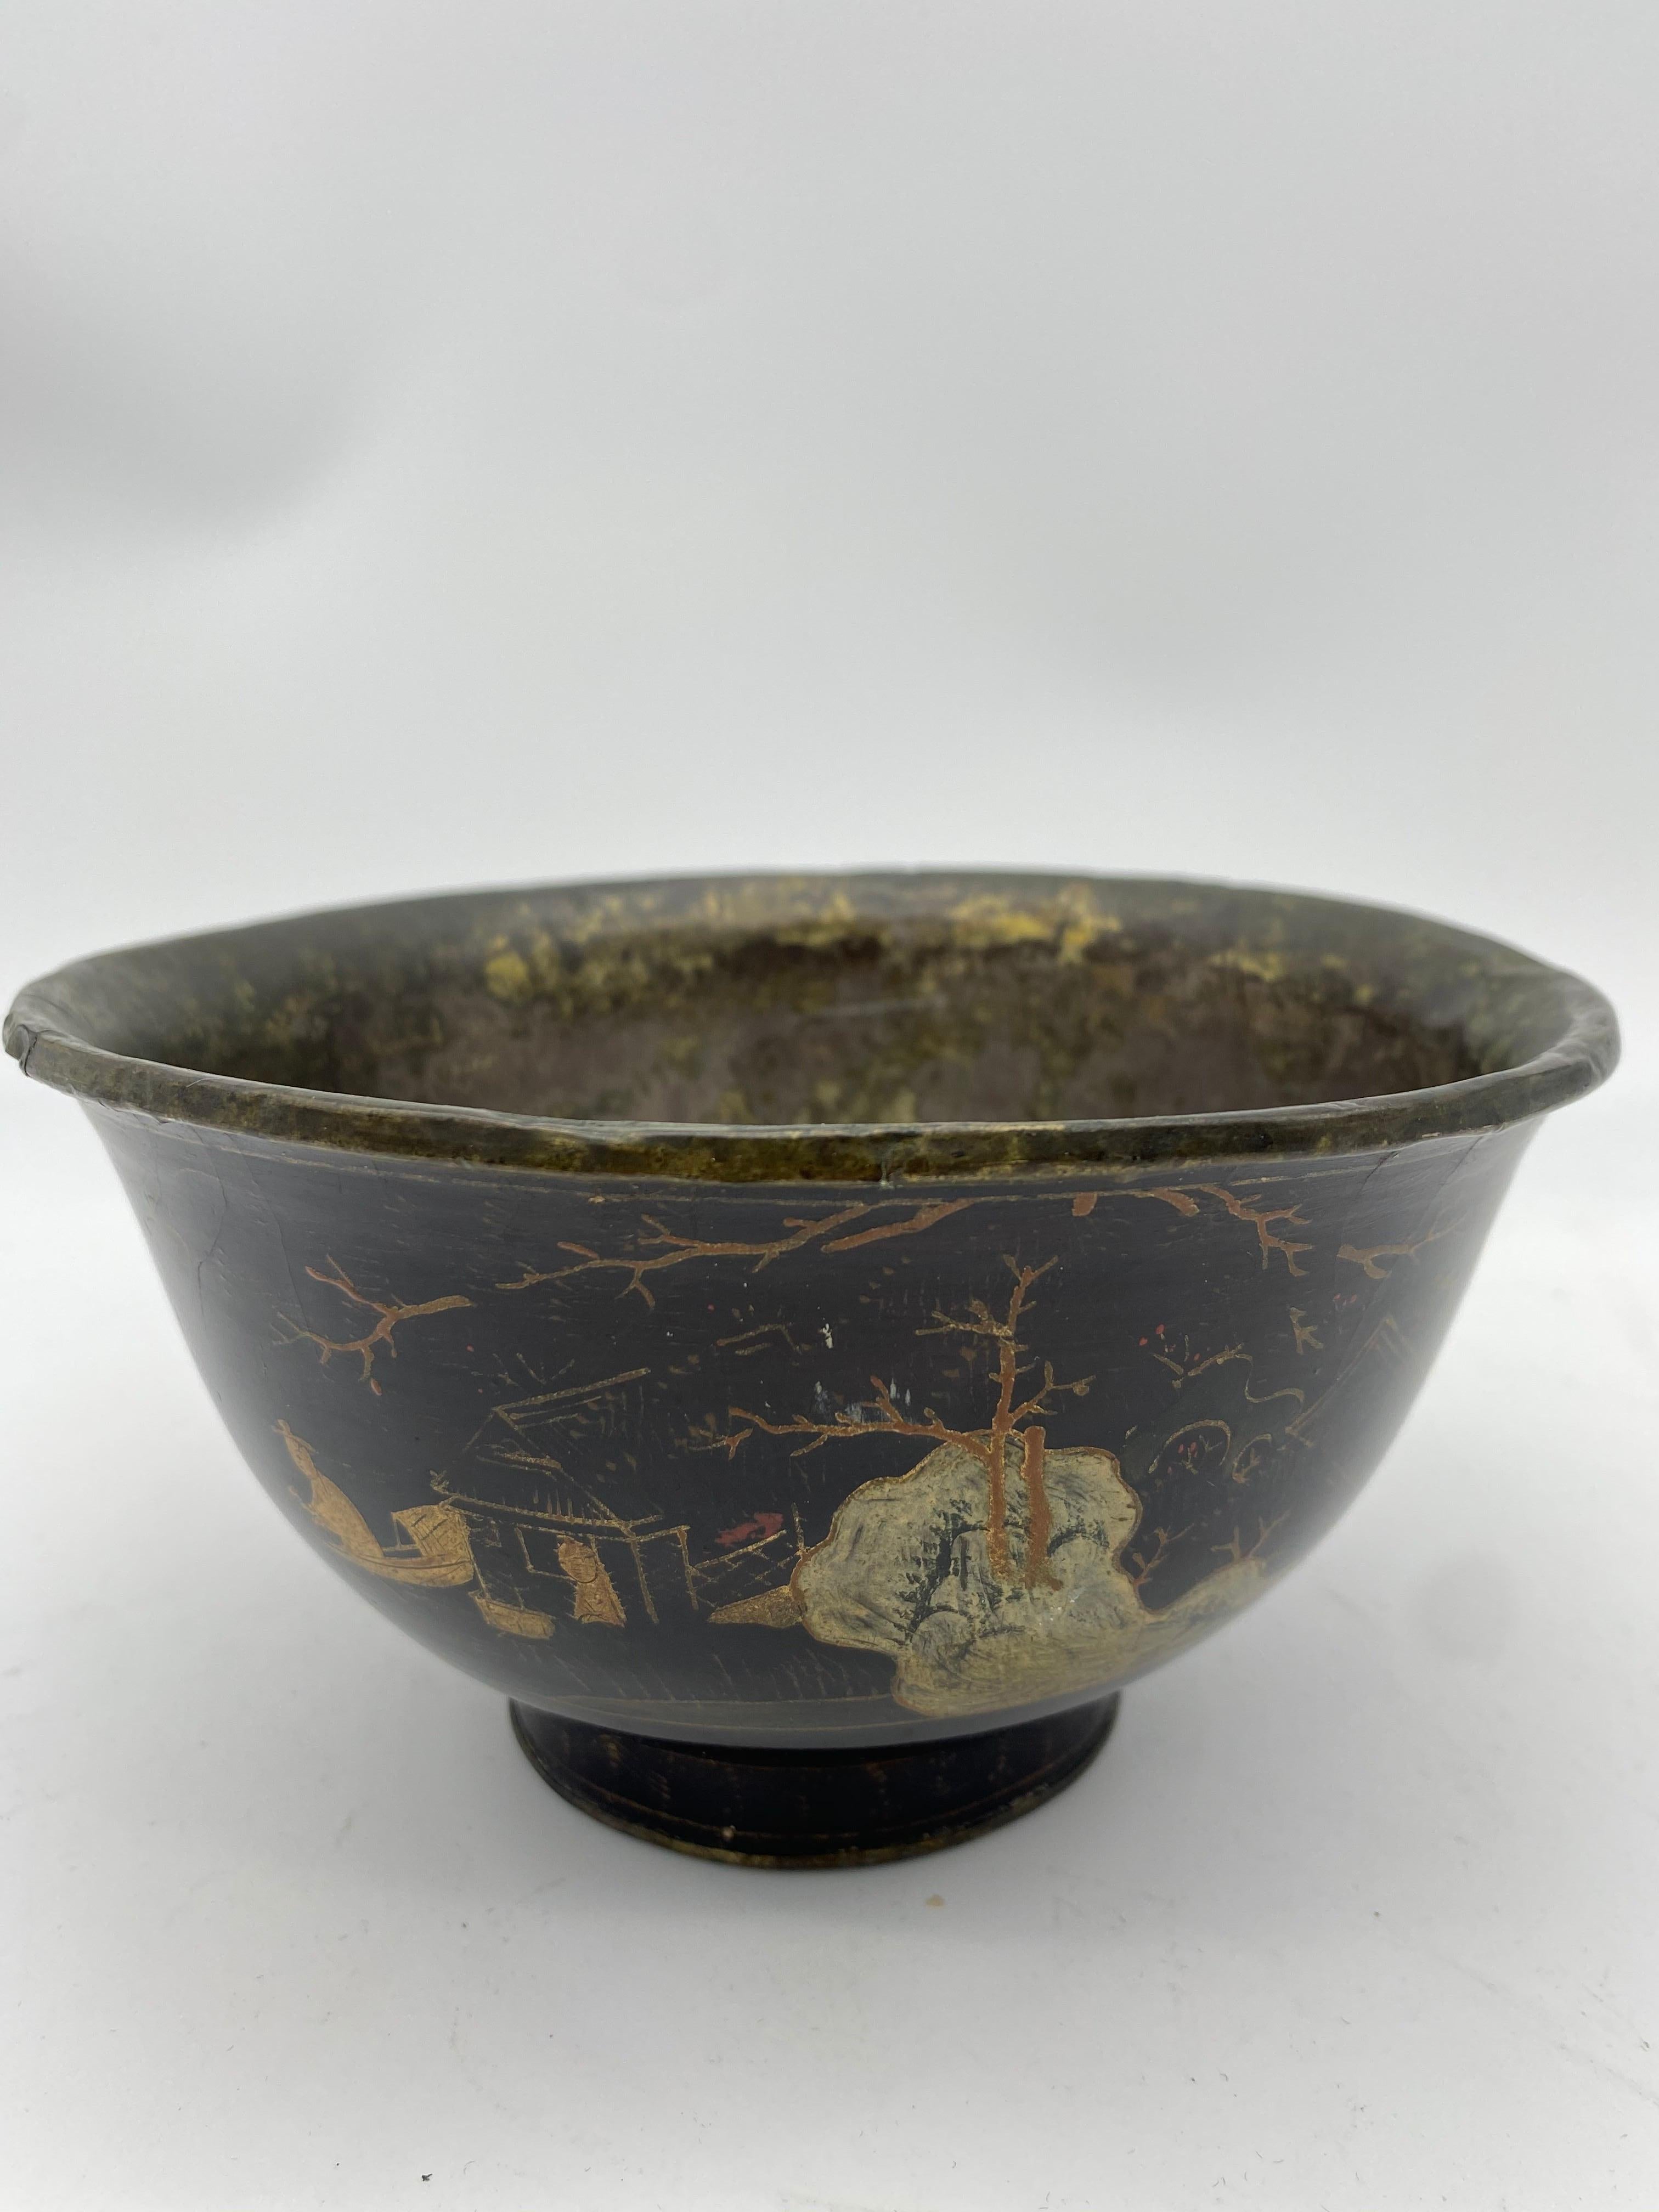 18th Century Chinese Lacquer Bowl with Pewter For Sale 5